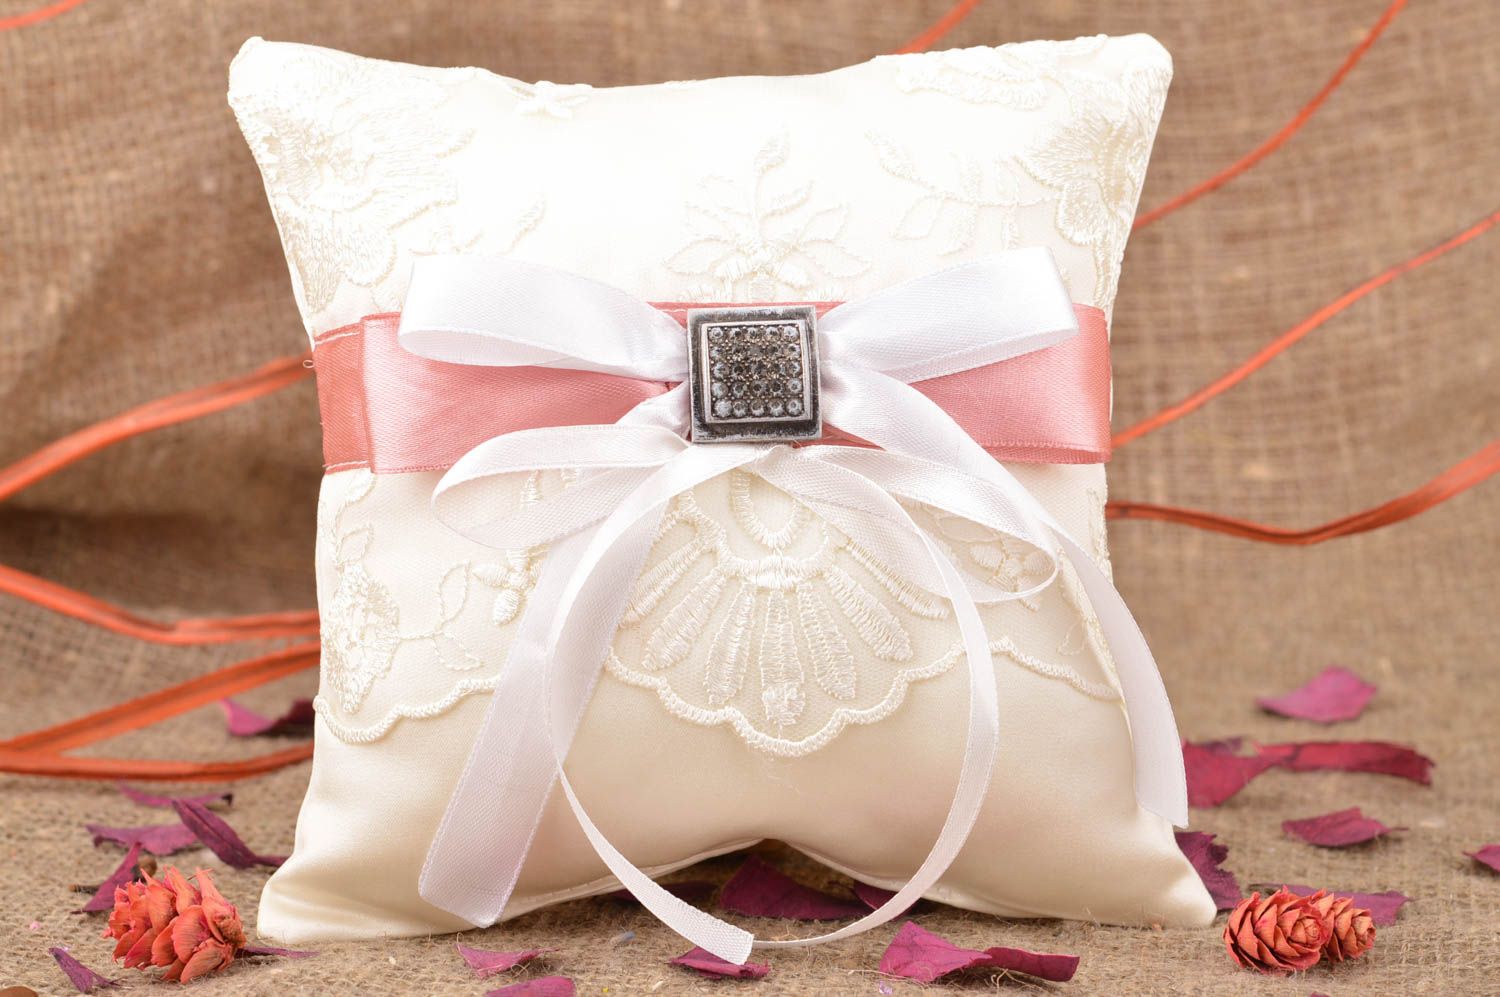 Homemade wedding ring pillow sewn of white satin with lace and pink ribbon photo 1